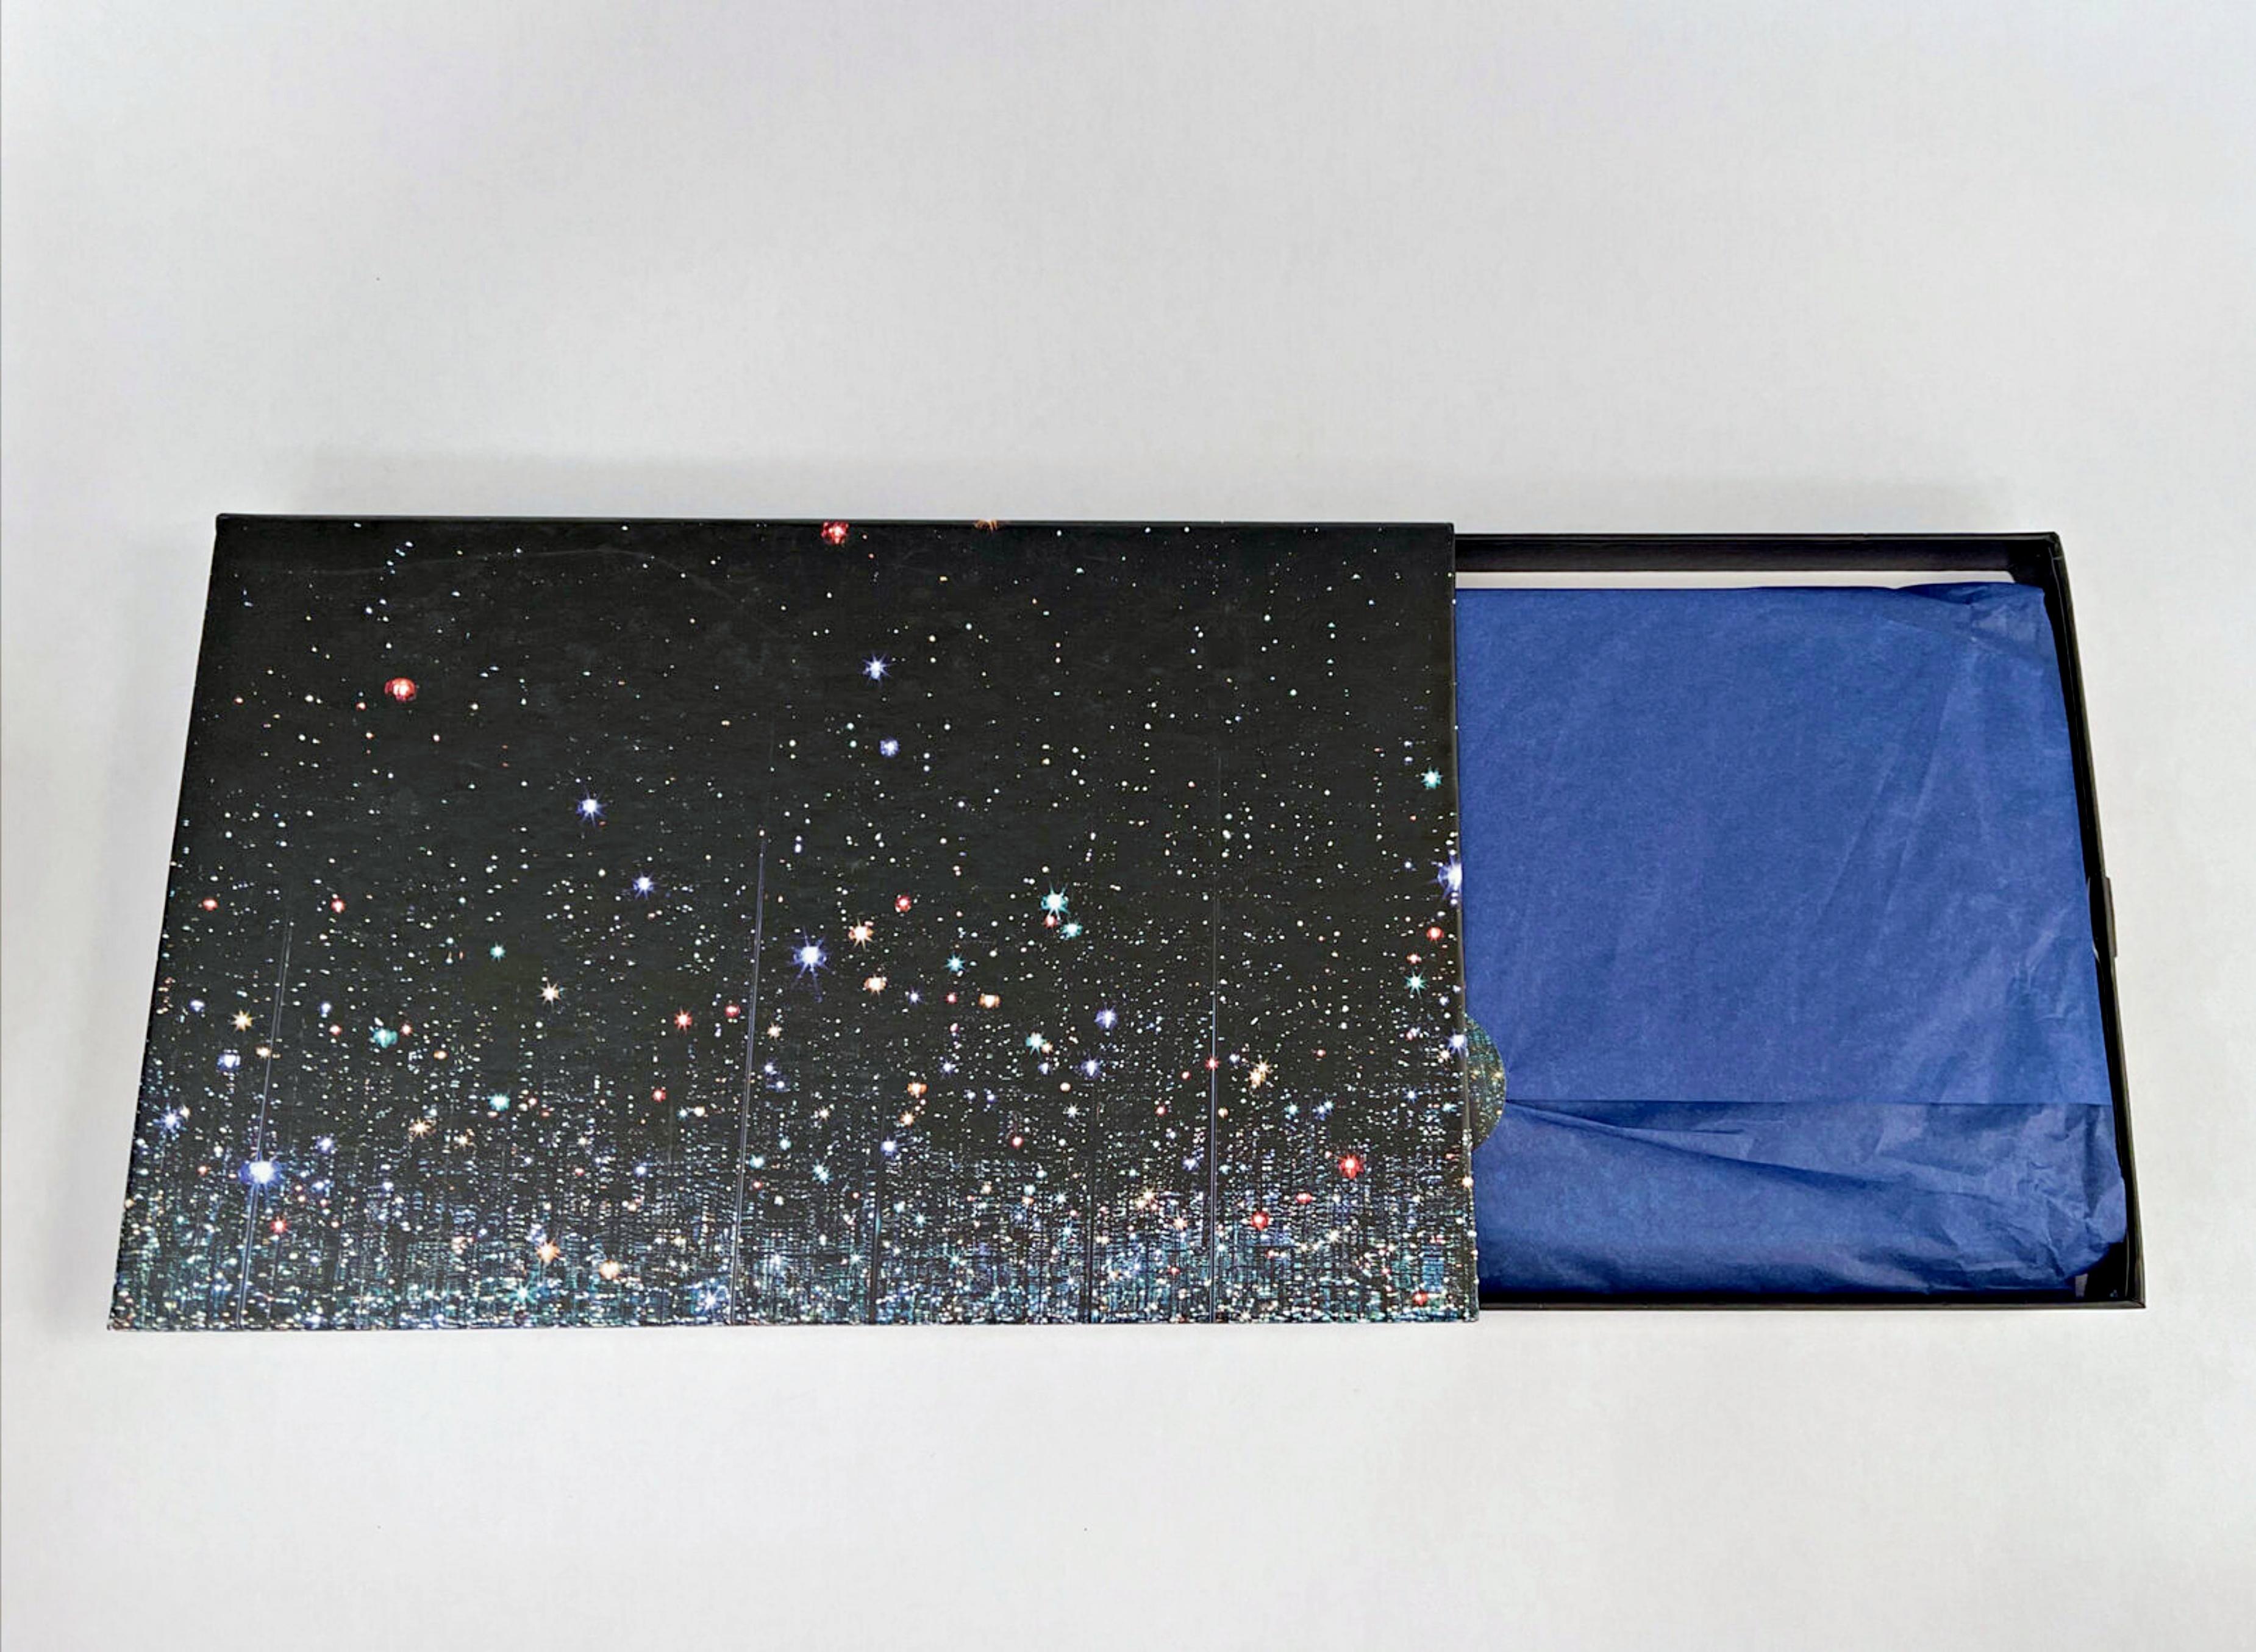 Limited Edition leather clutch (bag) depicting the famed Infinity Mirrored Room 1